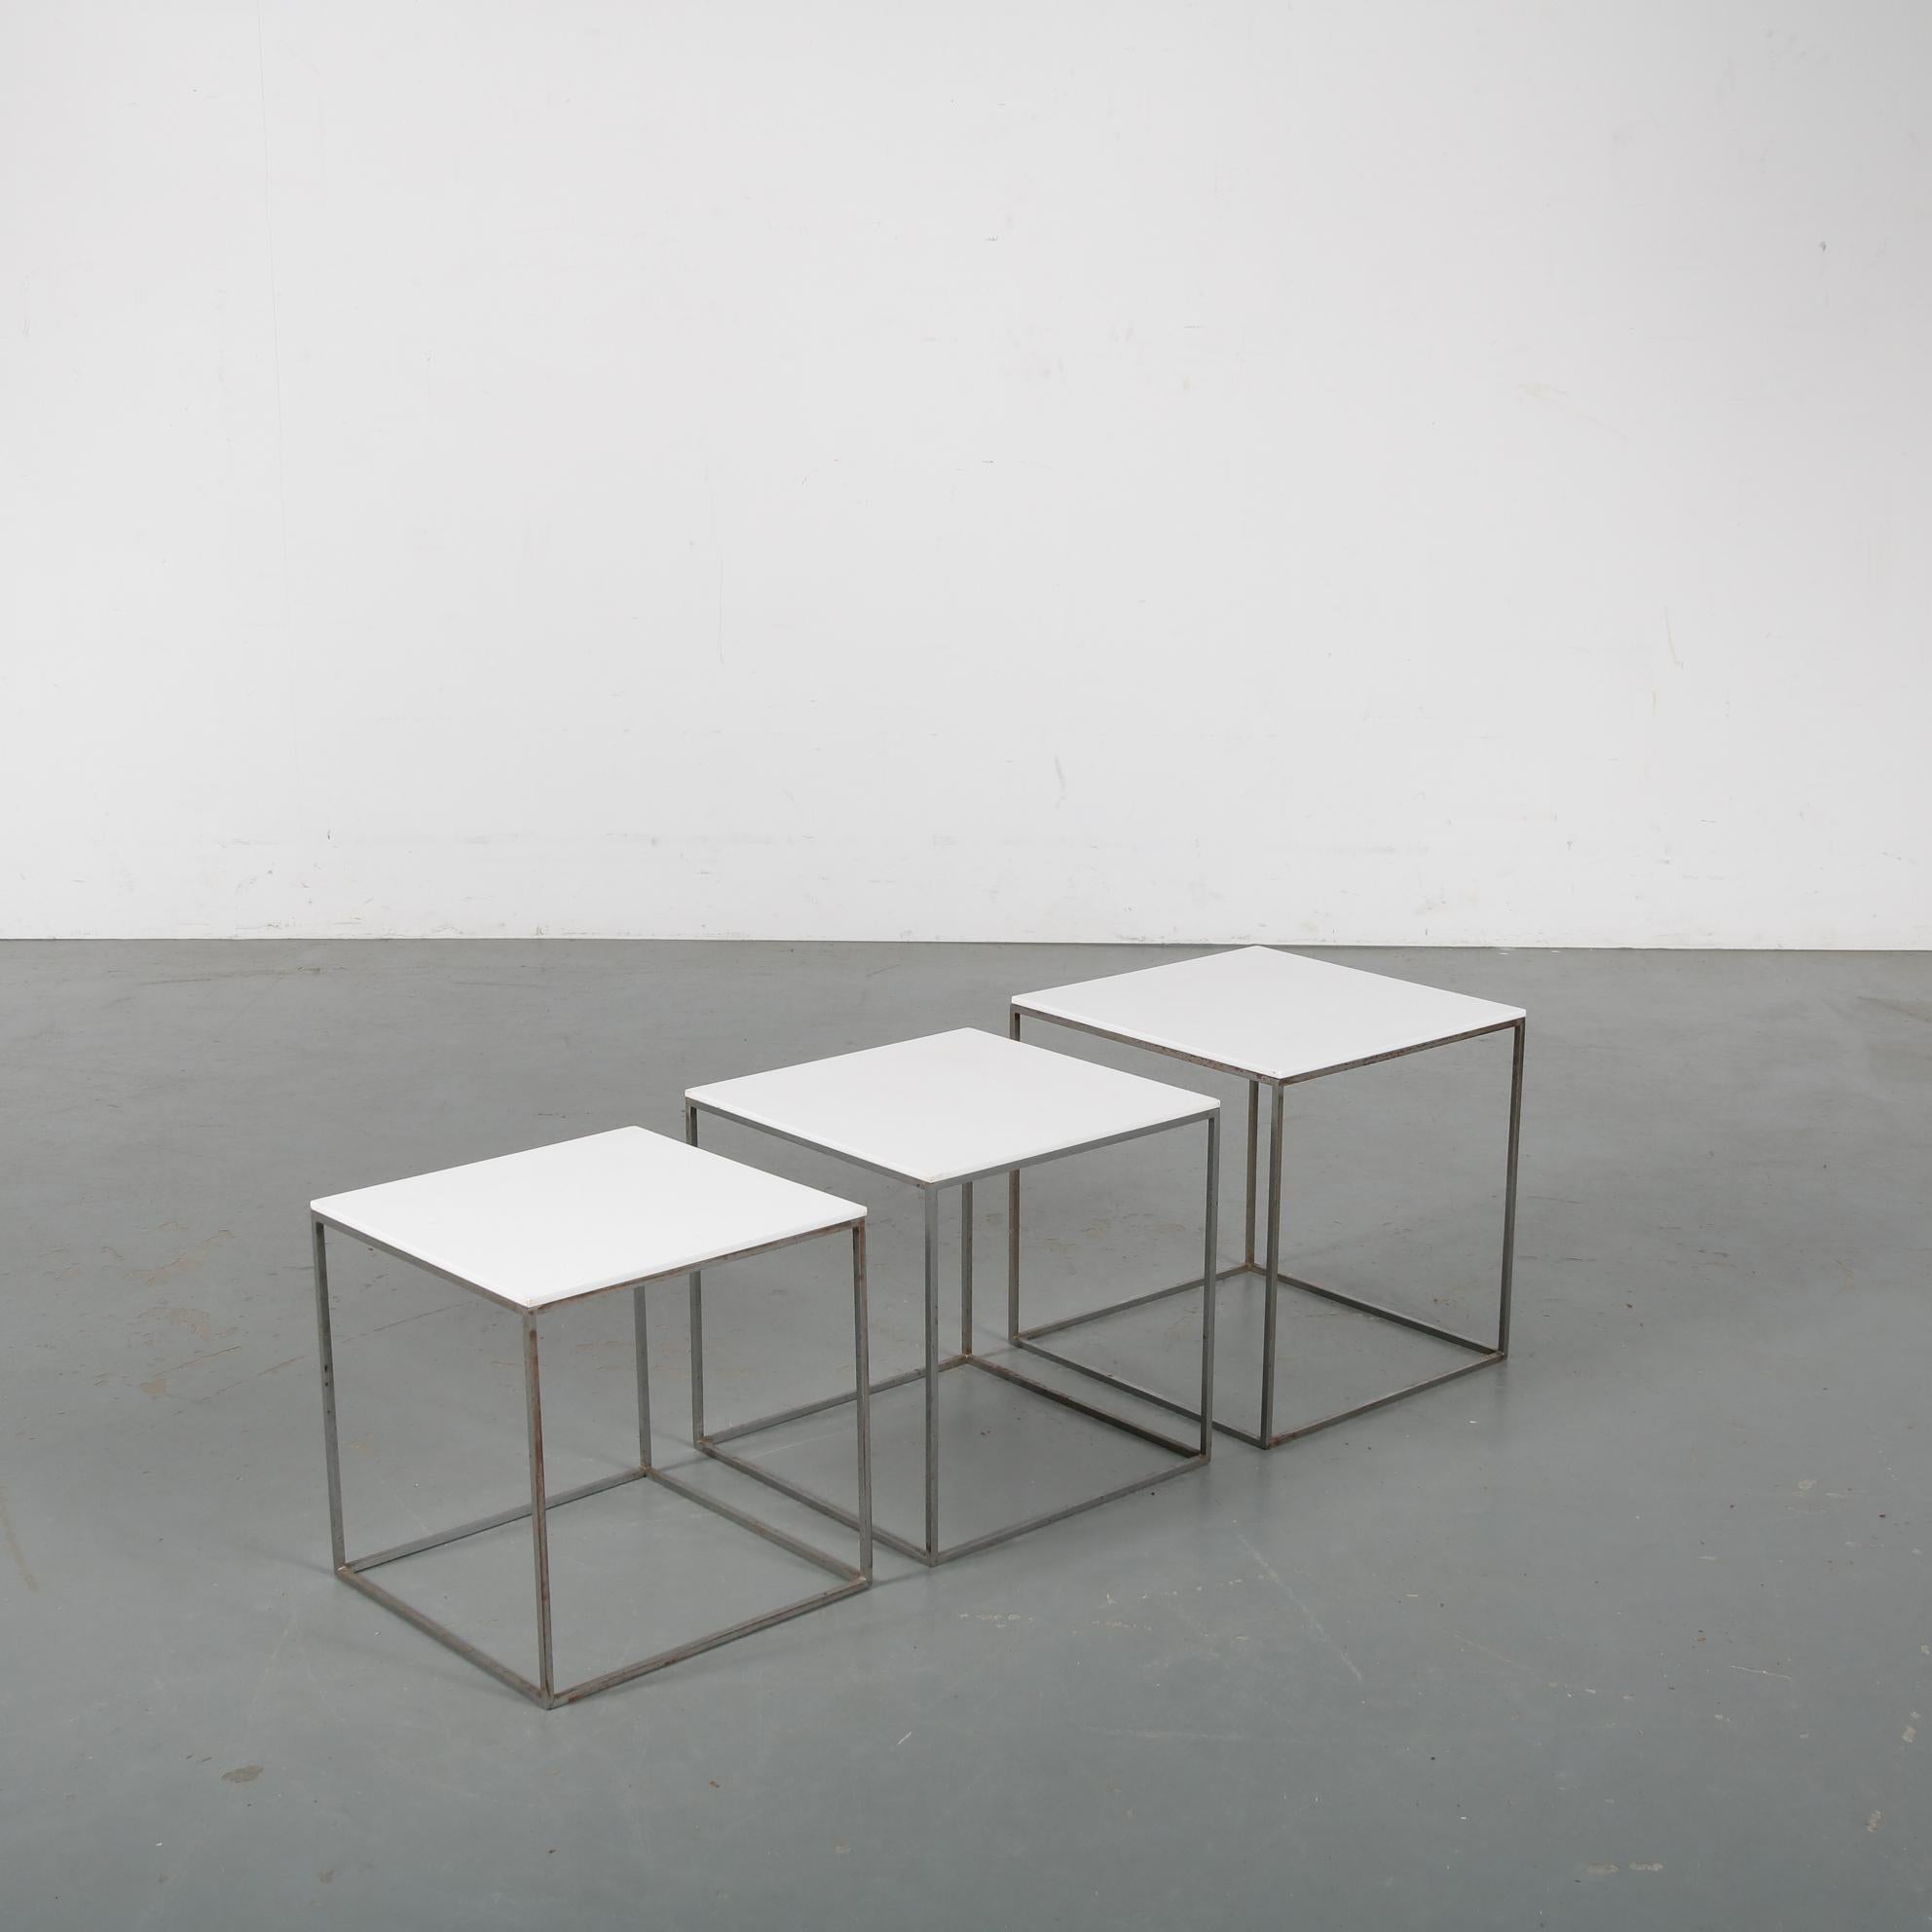 A set of three nesting tables, model PK71, designed by Poul Kjaerholm and manufactured by E. Kold Christensen in Denmark circa 1960.

Each table has an eye-catching square structure made of high quality grey metal. There is some wear and rust